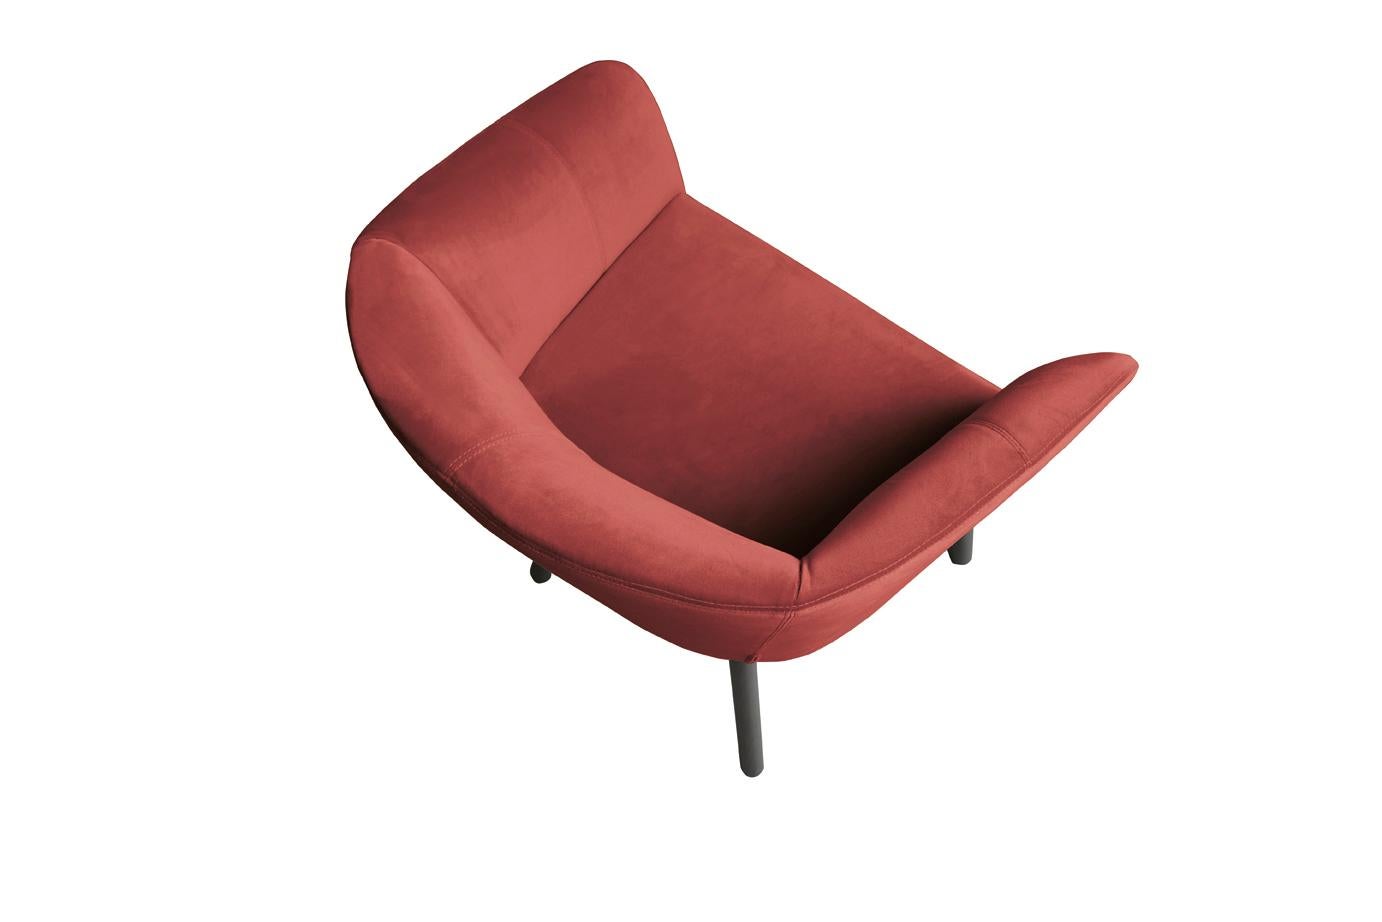 Modern Armchair Balu' Wood Frame Walnut and Upholstery in Red Velvet by Emilio Nanni For Sale